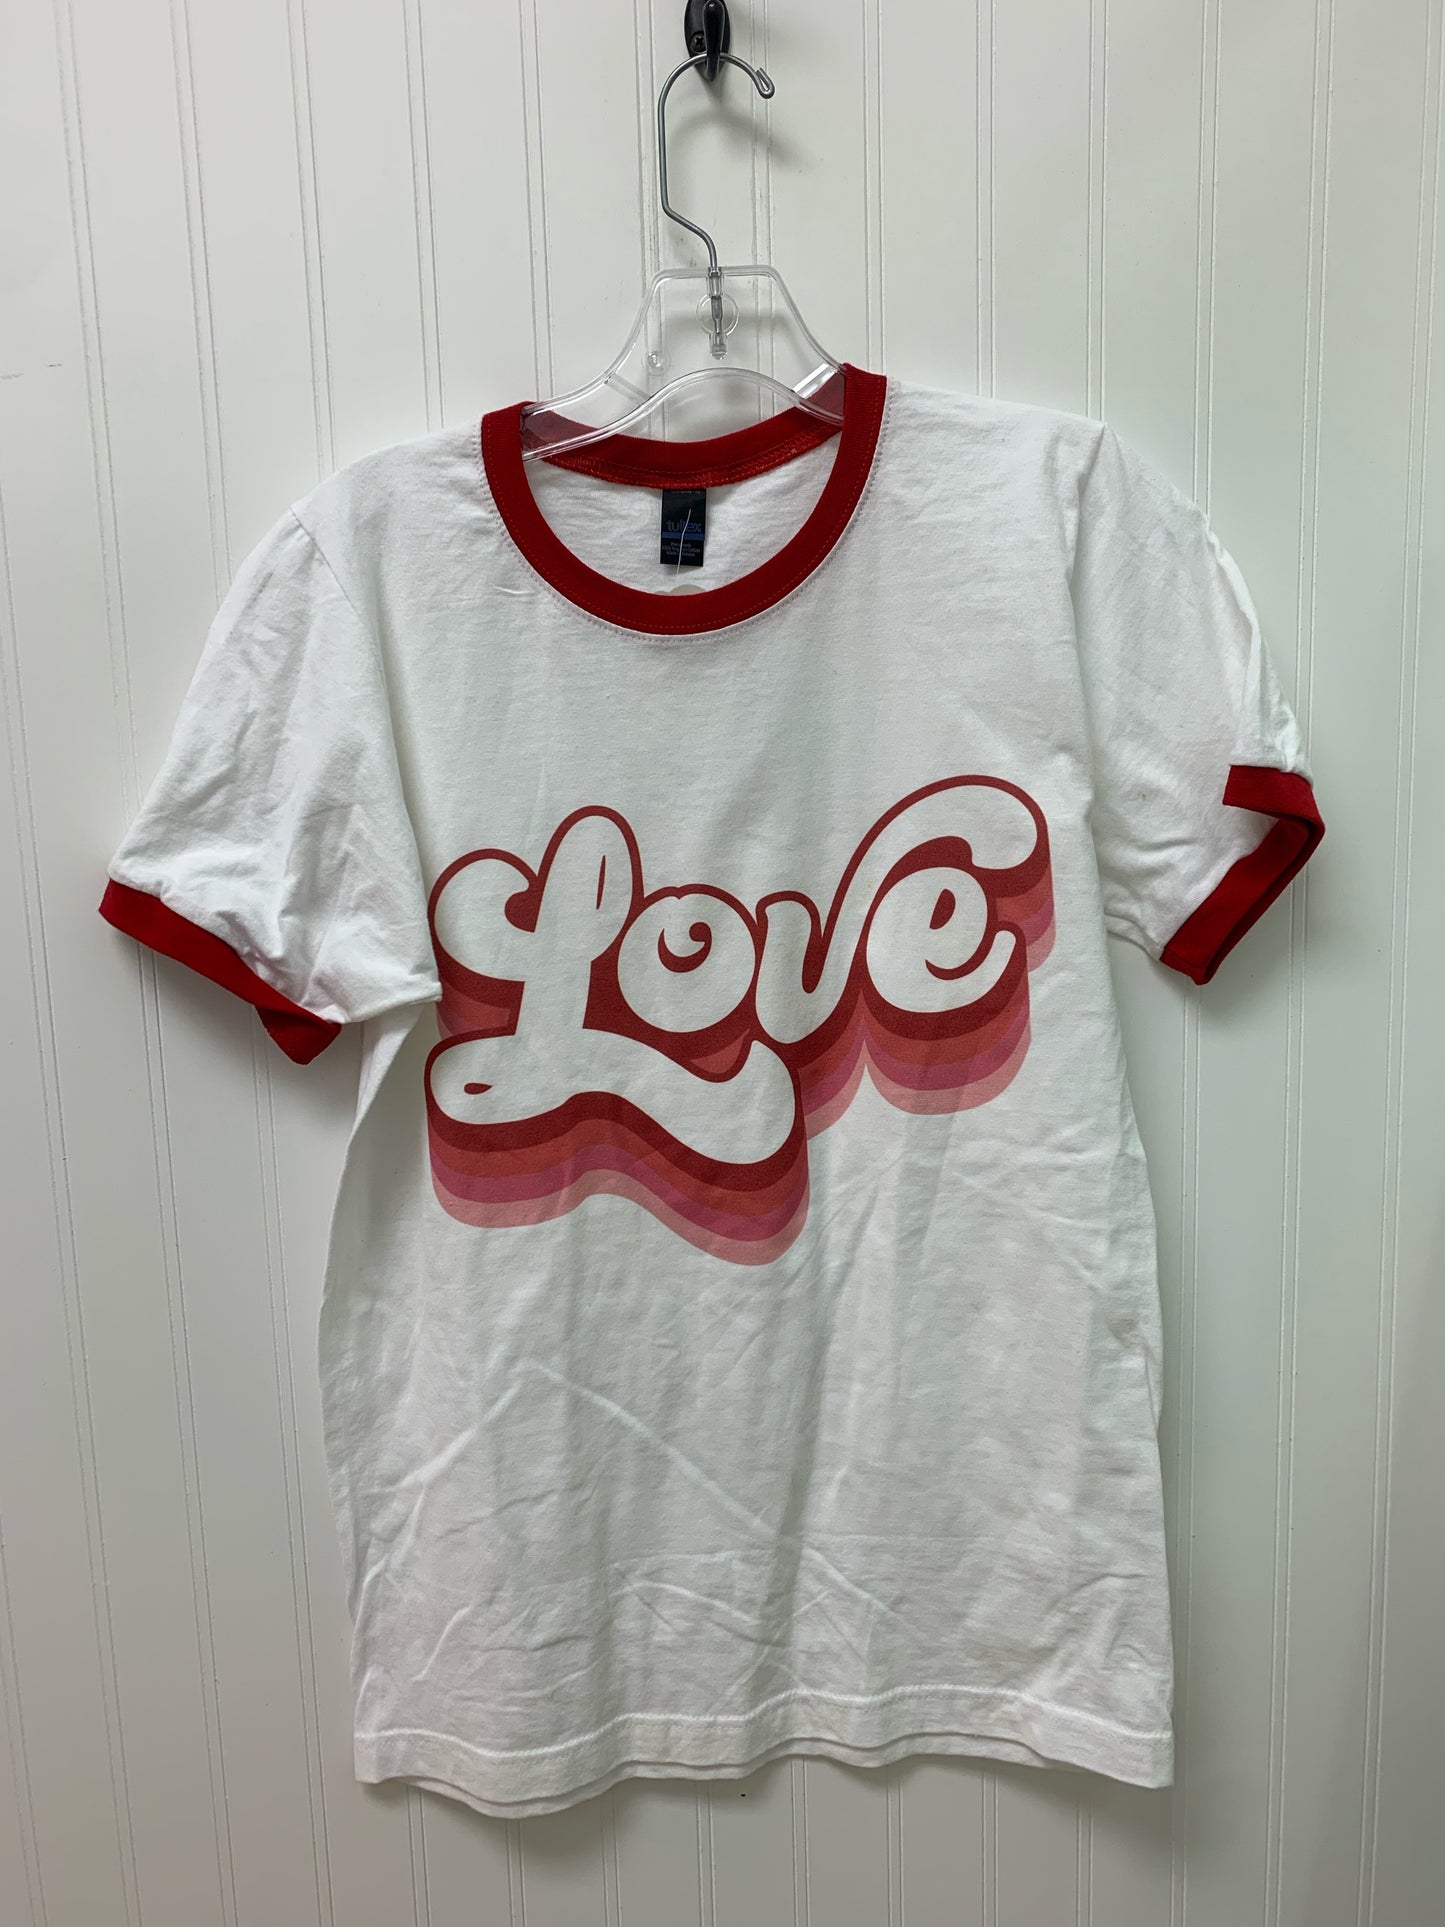 Bring in the Love Tee